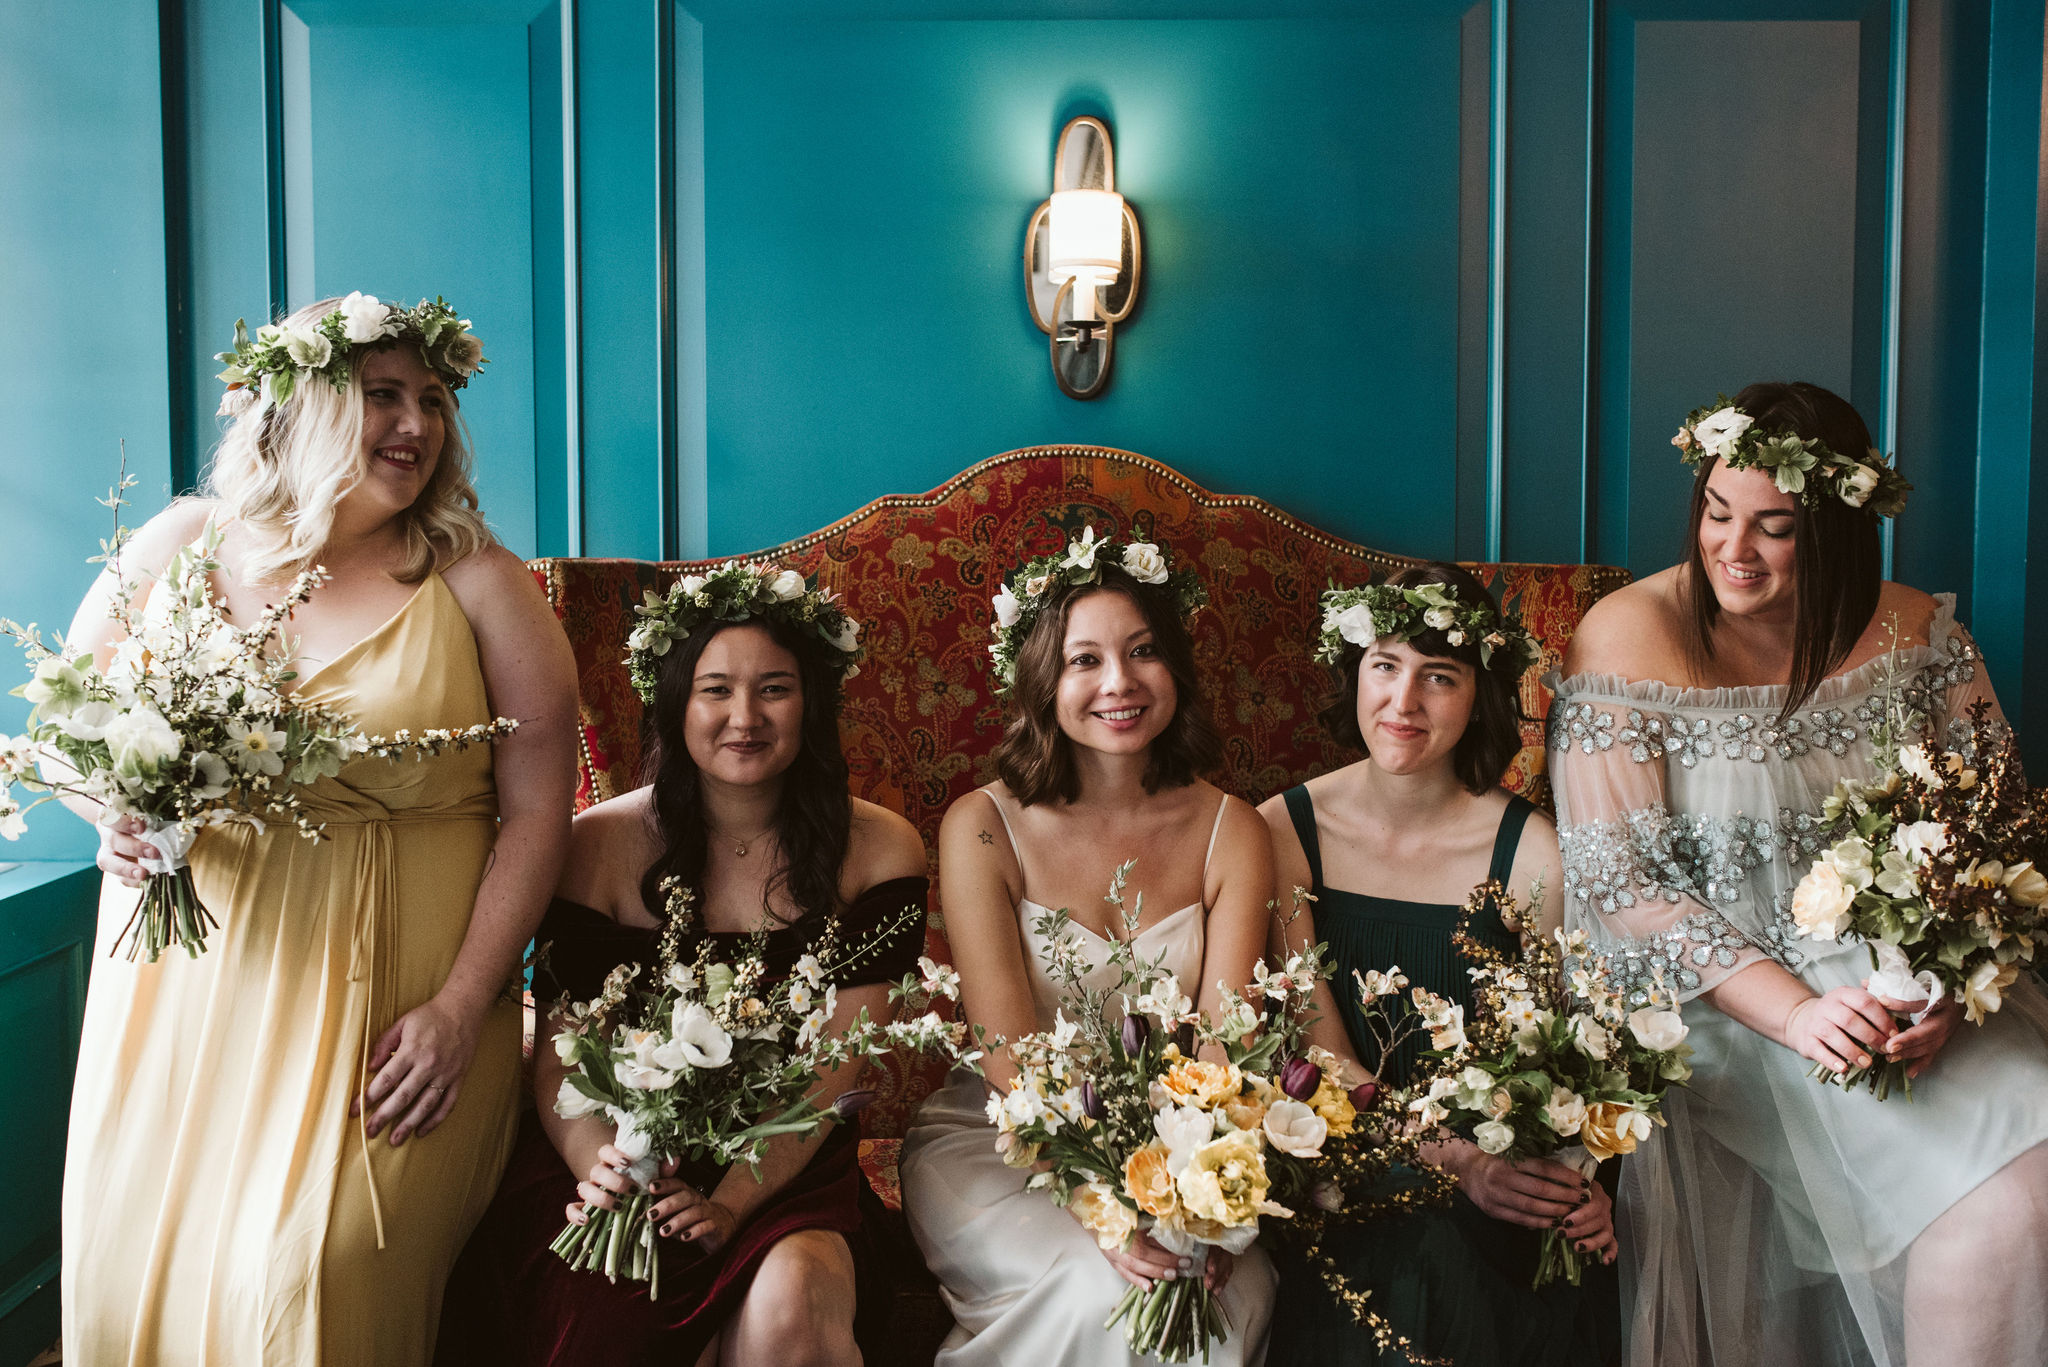  Washington DC, Baltimore Wedding Photographer, Alexandria, Old Town, Jewel Tone, Romantic, Modern, The Alexandrian Autograph Collection Hotel, Bride sitting with bridesmaids on vintage couch, Sungold Flower Co, Flower crowns 